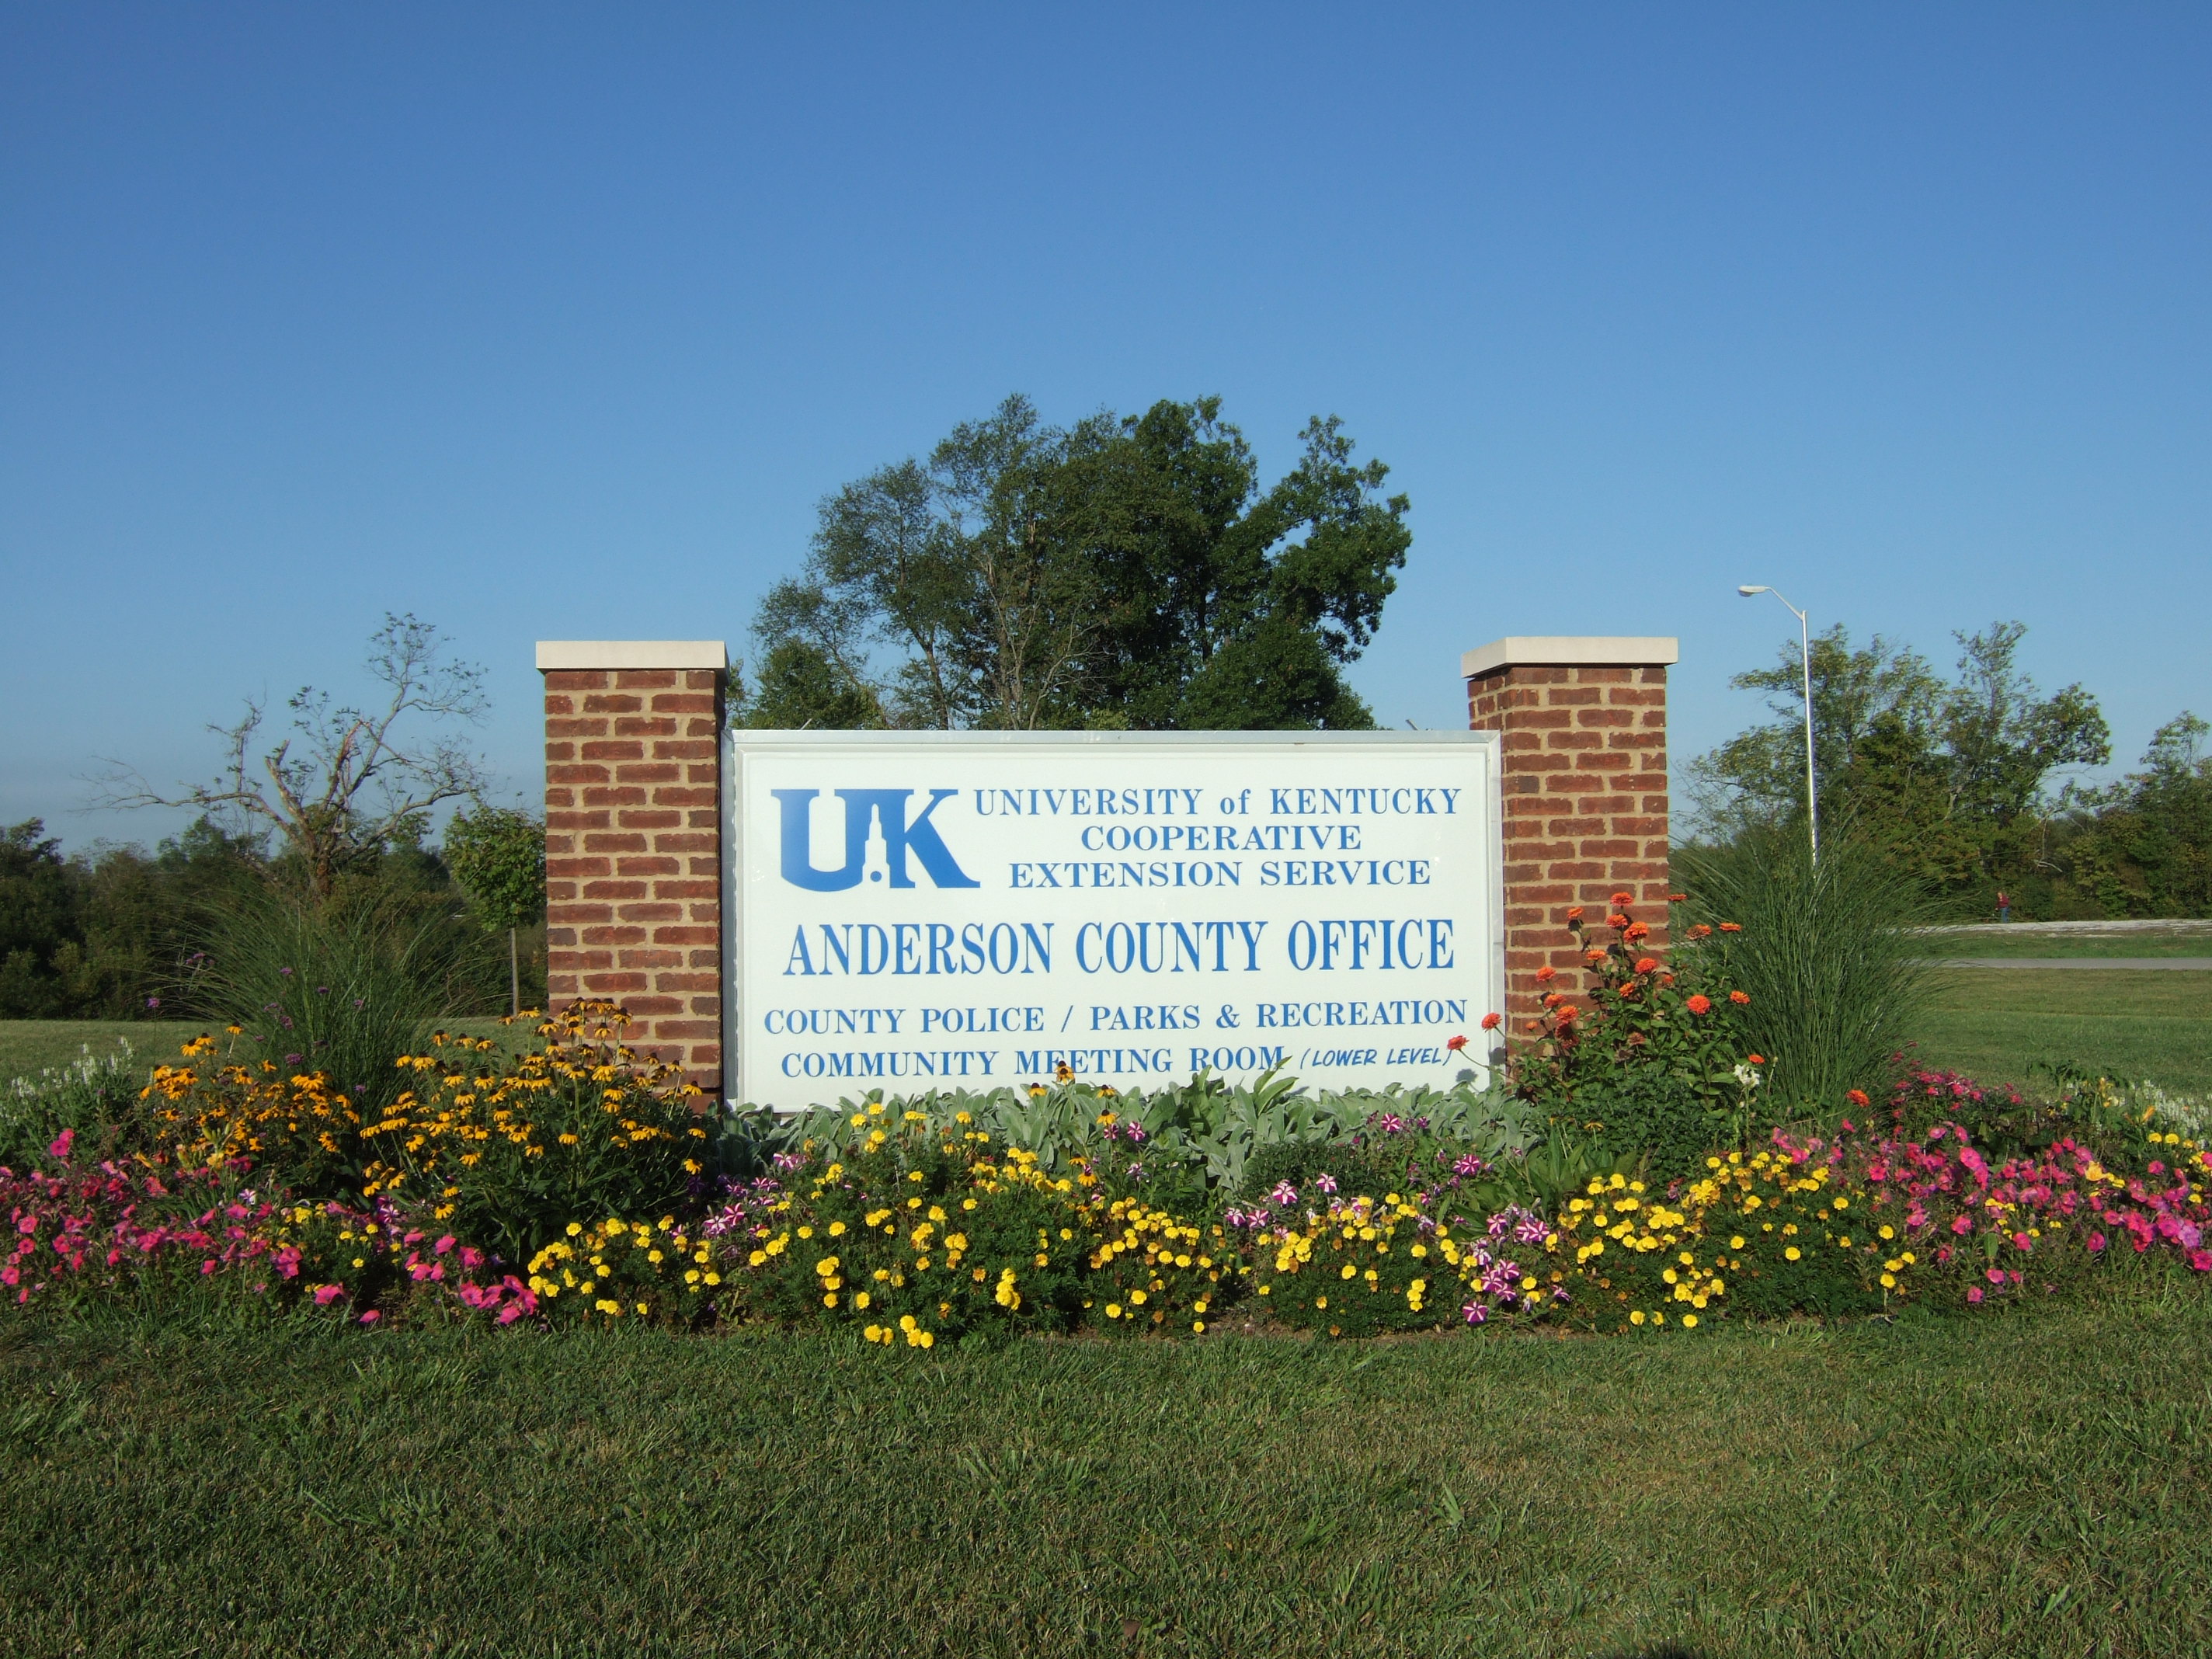 Photo of outside sign and flowers